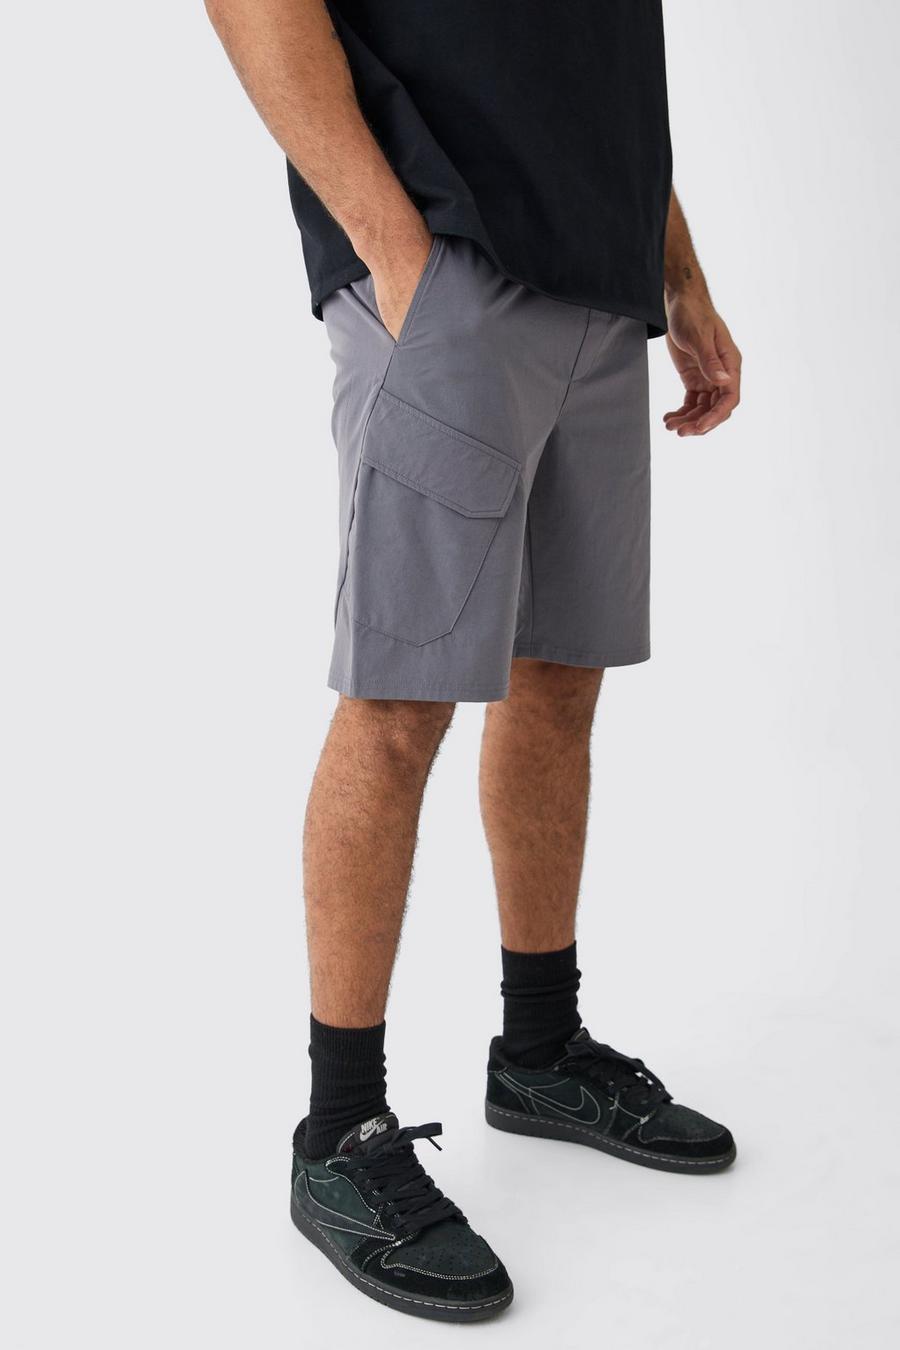 Charcoal Elastische Comfortabele Dunne Stretch Shorts image number 1